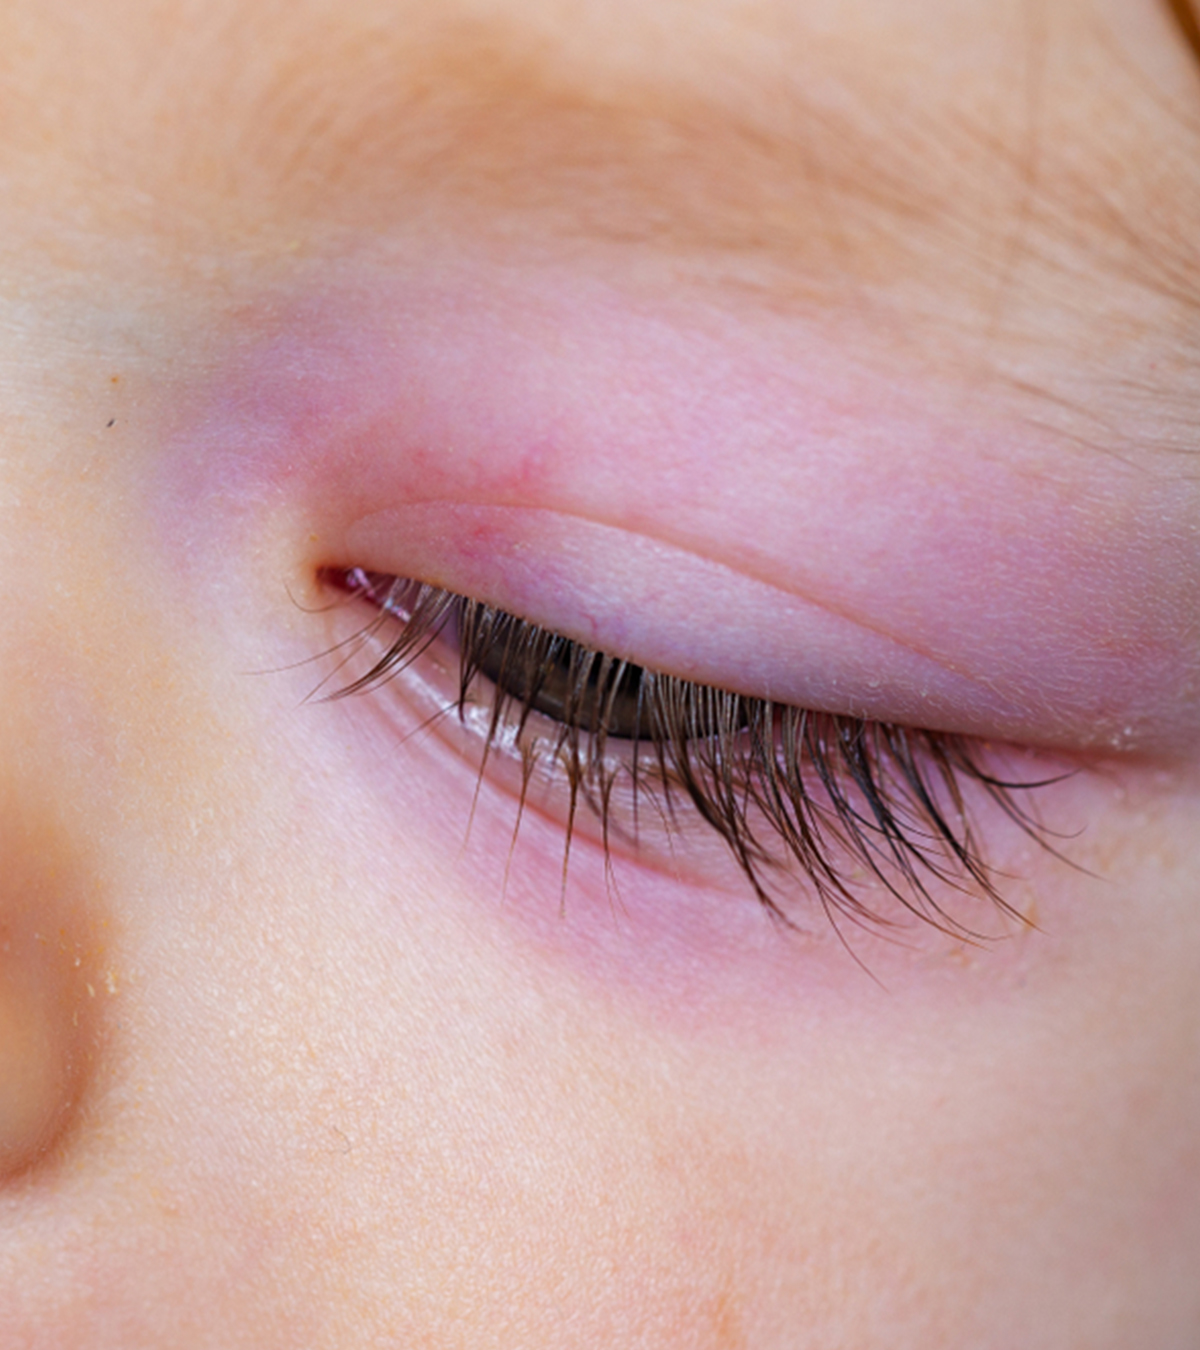 Swollen Eyes In Babies: Causes, Home Remedies & Treatment